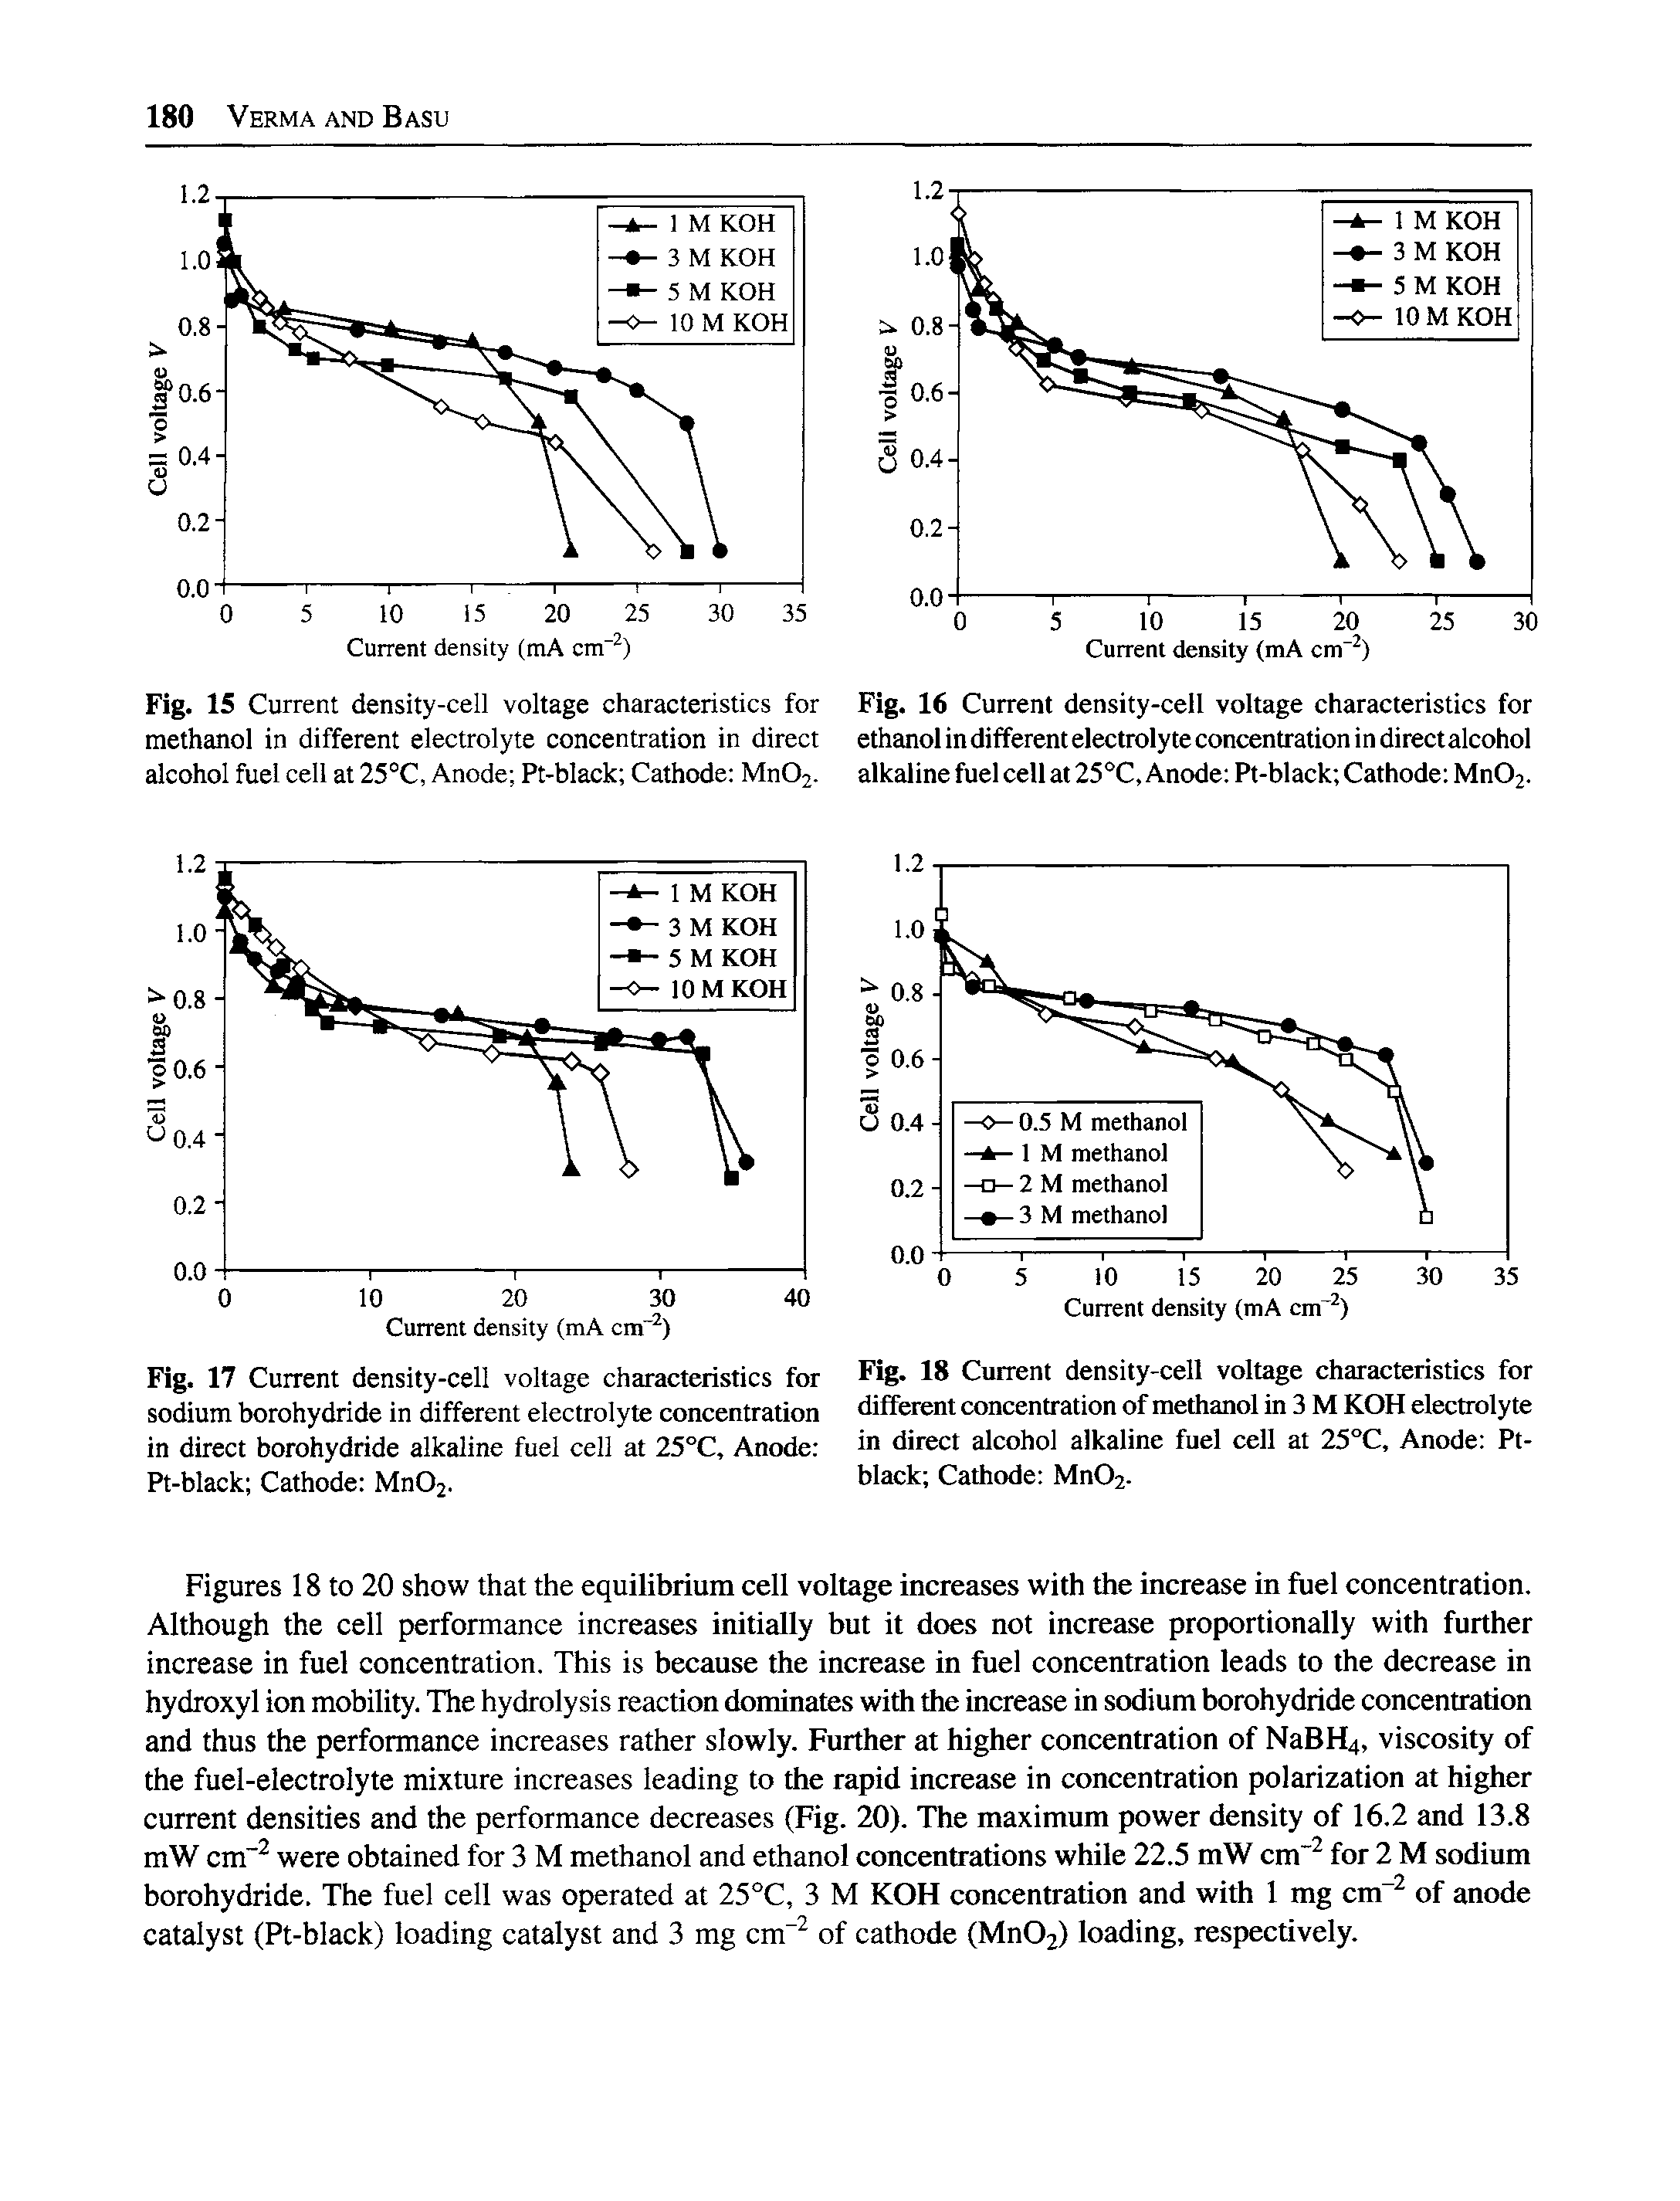 Figures 18 to 20 show that the equilibrium cell voltage increases with the increase in fuel concentration. Although the cell performance increases initially but it does not increase proportionally with further increase in fuel concentration. This is because the increase in fuel concentration leads to the decrease in hydroxyl ion mobility. The hydrolysis reaction dominates with the increase in sodium borohydride concentration and thus the performance increases rather slowly. Further at higher concentration of NaBH4, viscosity of the fuel-electrolyte mixture increases leading to the rapid increase in concentration polarization at higher current densities and the performance decreases (Fig. 20). The maximum power density of 16.2 and 13.8 mW cm" were obtained for 3 M methanol and ethanol concentrations while 22.5 mW cm" for 2 M sodium borohydride. The fuel cell was operated at 25°C, 3 M KOH concentration and with 1 mg cm " of anode catalyst (Pt-black) loading catalyst and 3 mg cm" of cathode (Mn02) loading, respectively.